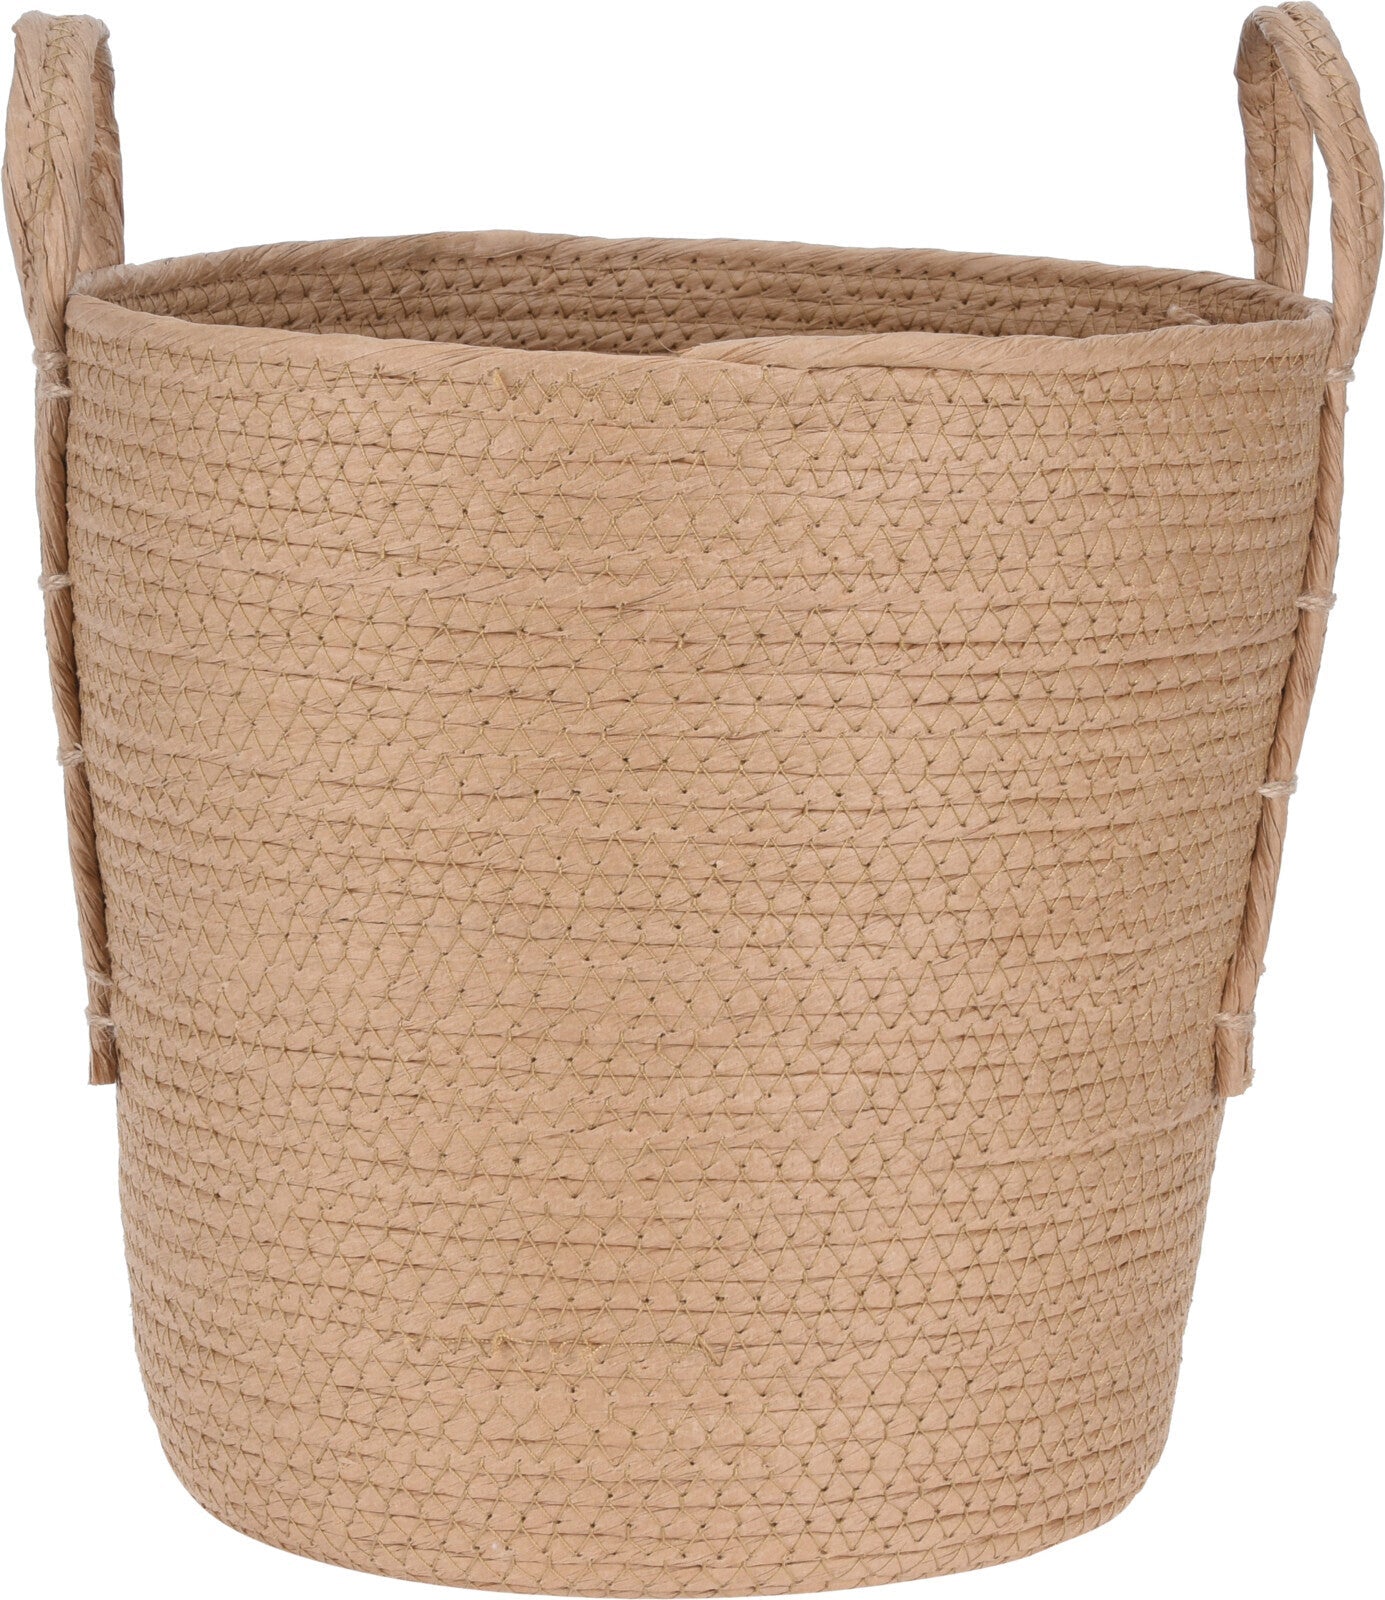 Basket Set Of 3 Sizes, Each Piece With 2 Handles